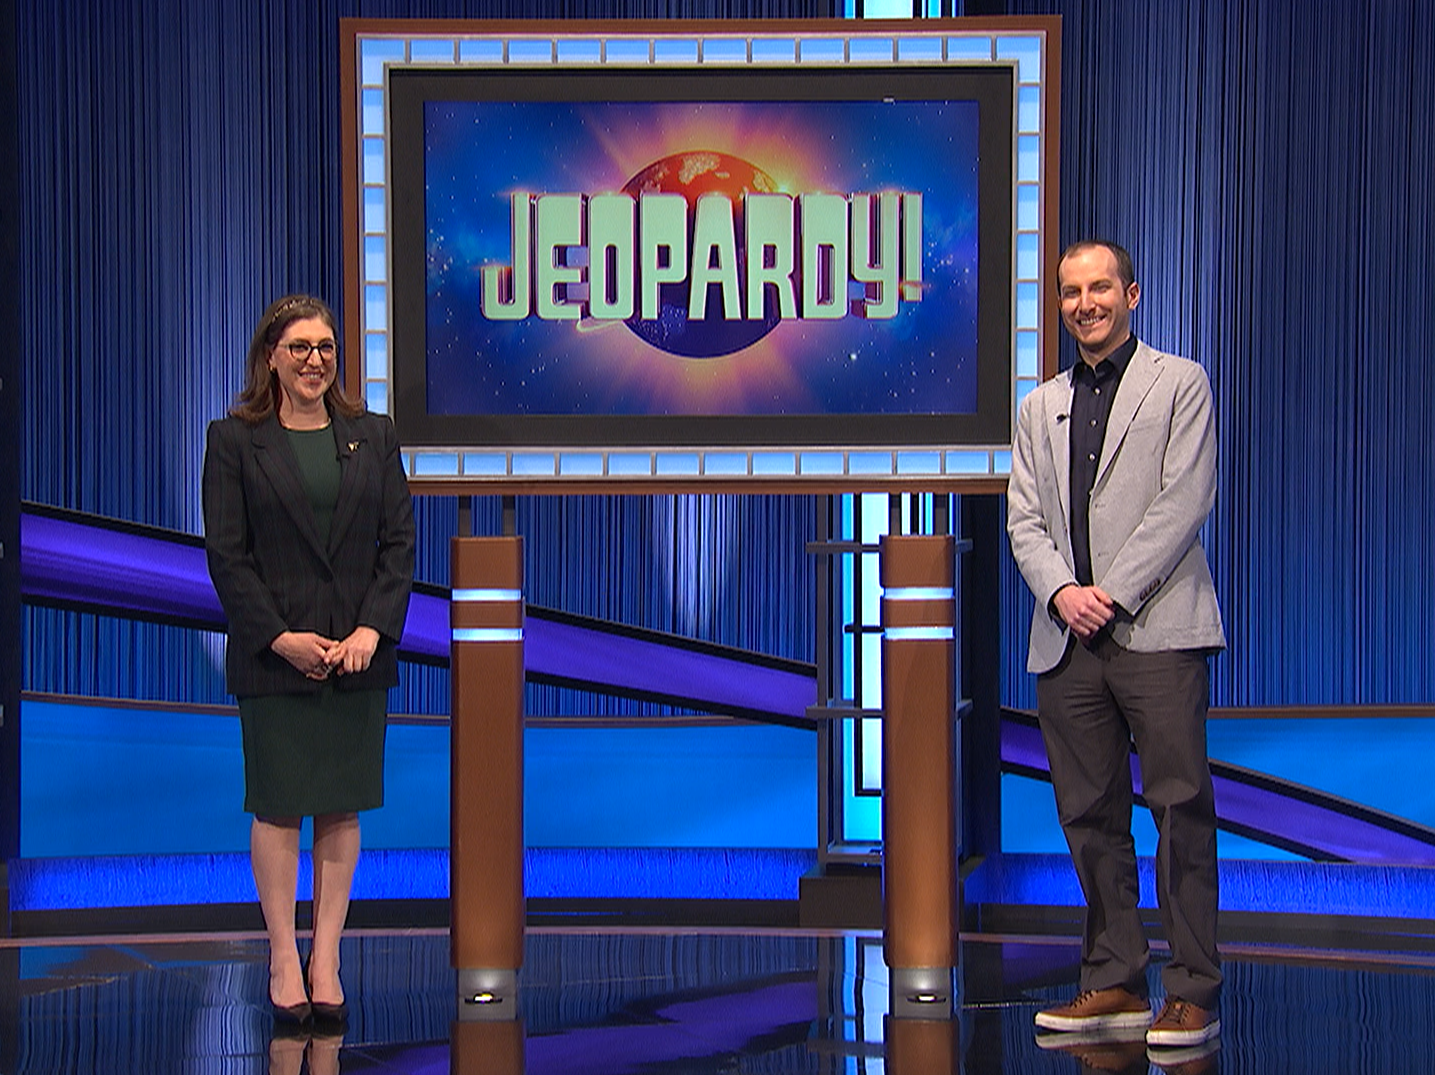 MATTEA 2.0?: Another Toronto contestant competing on 'Jeopardy!'